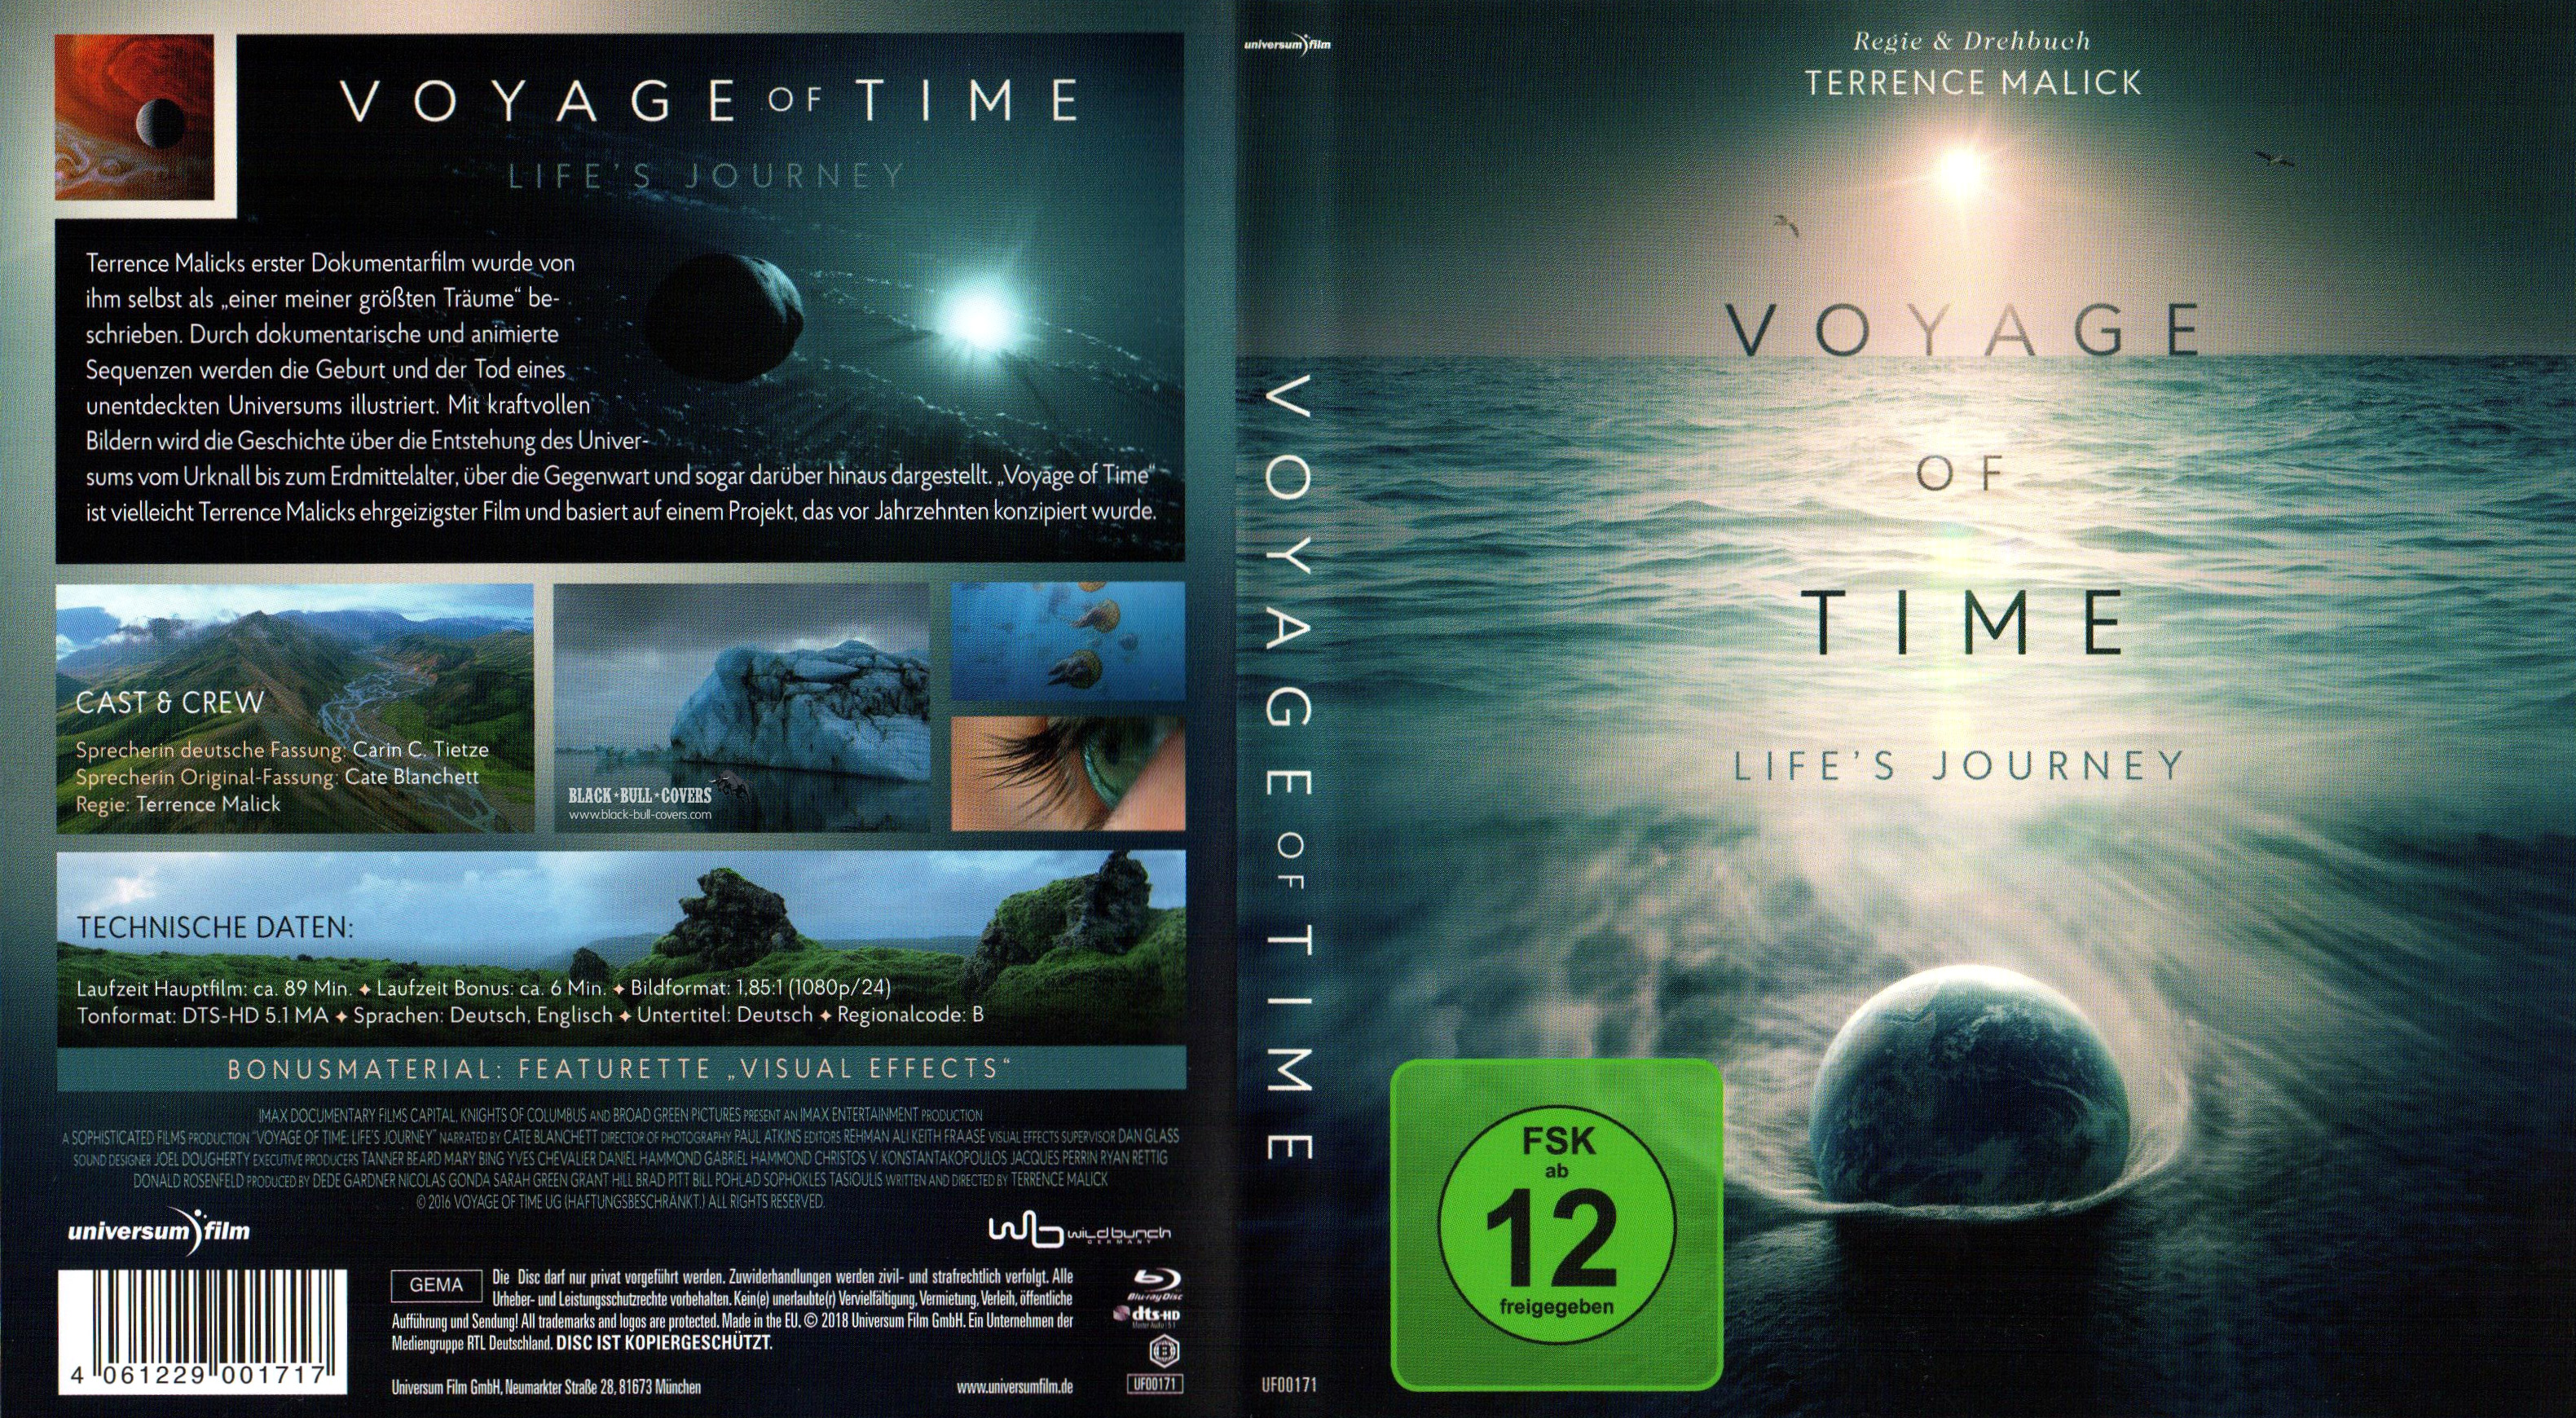 Voyage of Time Lifes Journey Cover Bluray 